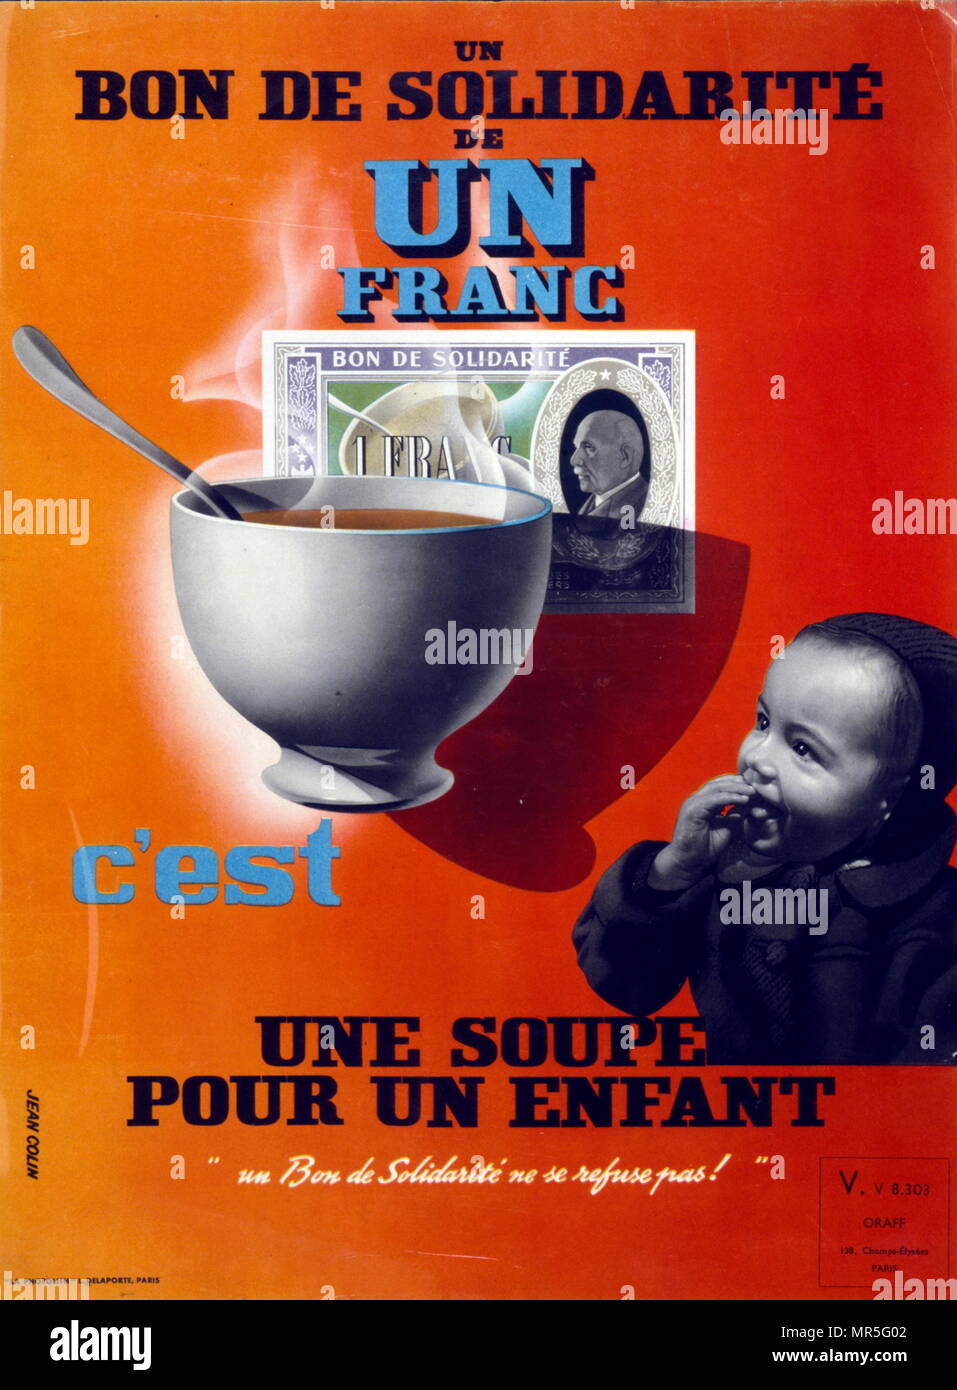 French world war two poster appealing for citizens to raise funds by buying soup for children in Vichy France Stock Photo